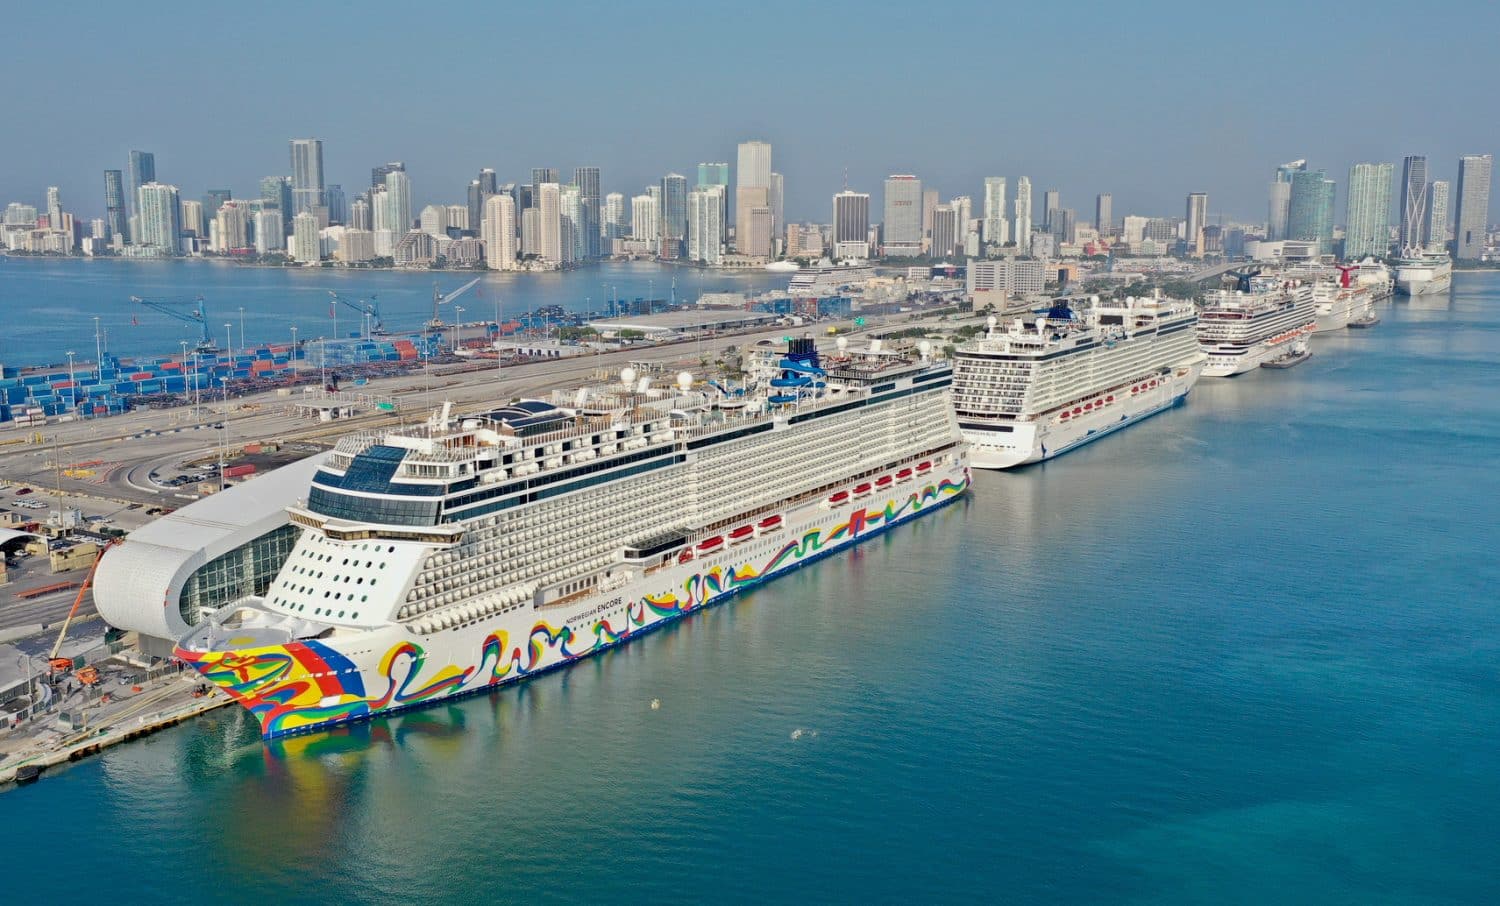 Cruise ships lines up in Port Miami